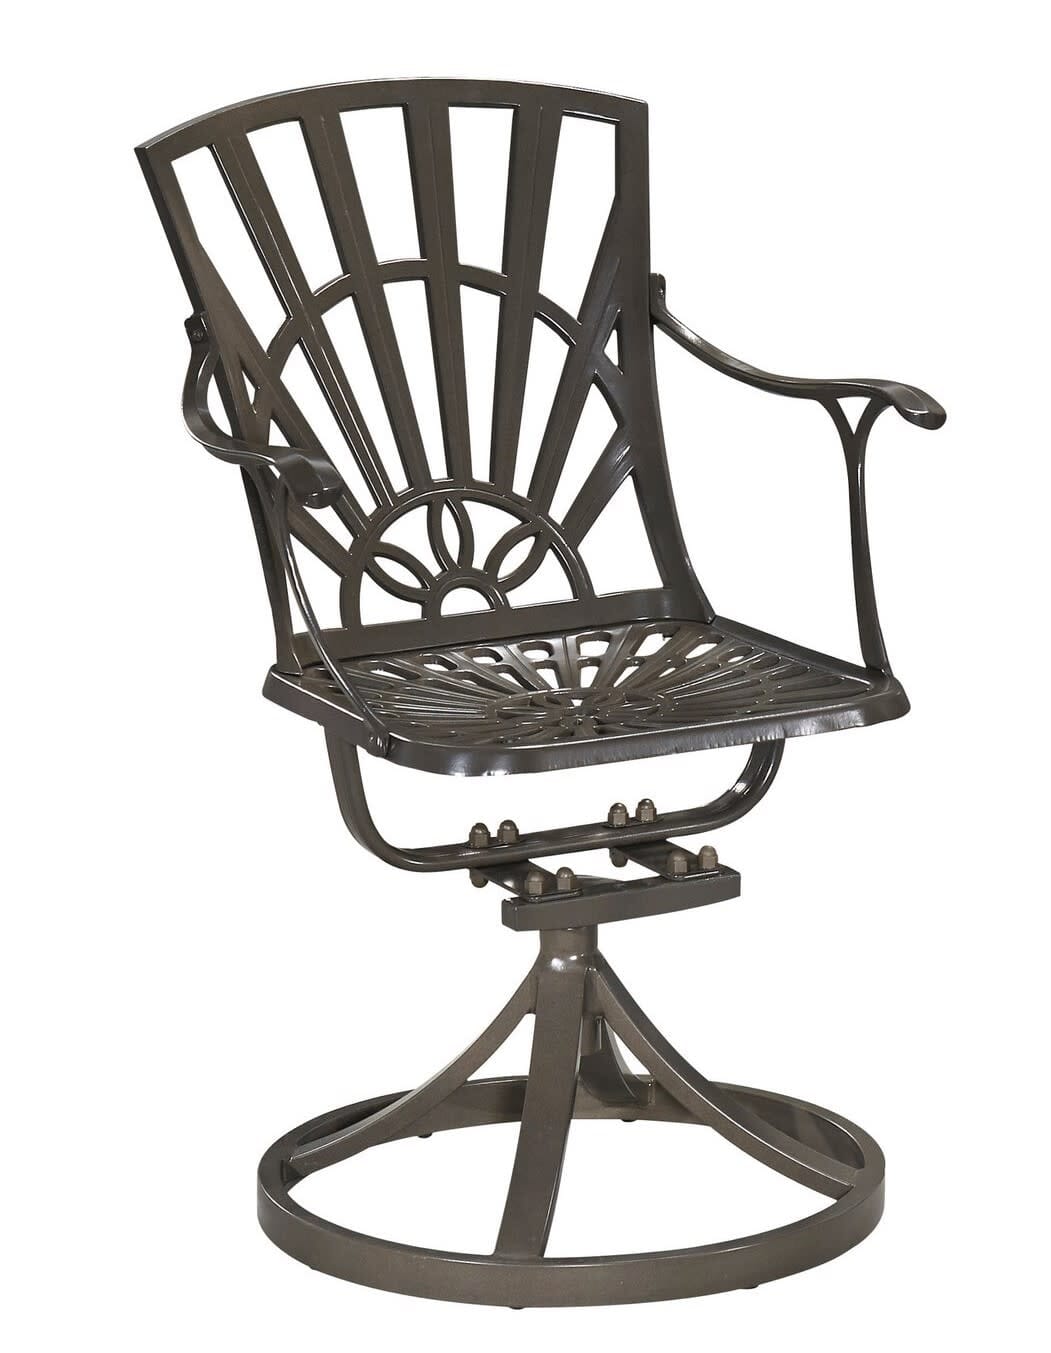 Traditional Outdoor Swivel Rocking Chair By Grenada Outdoor Seating Grenada